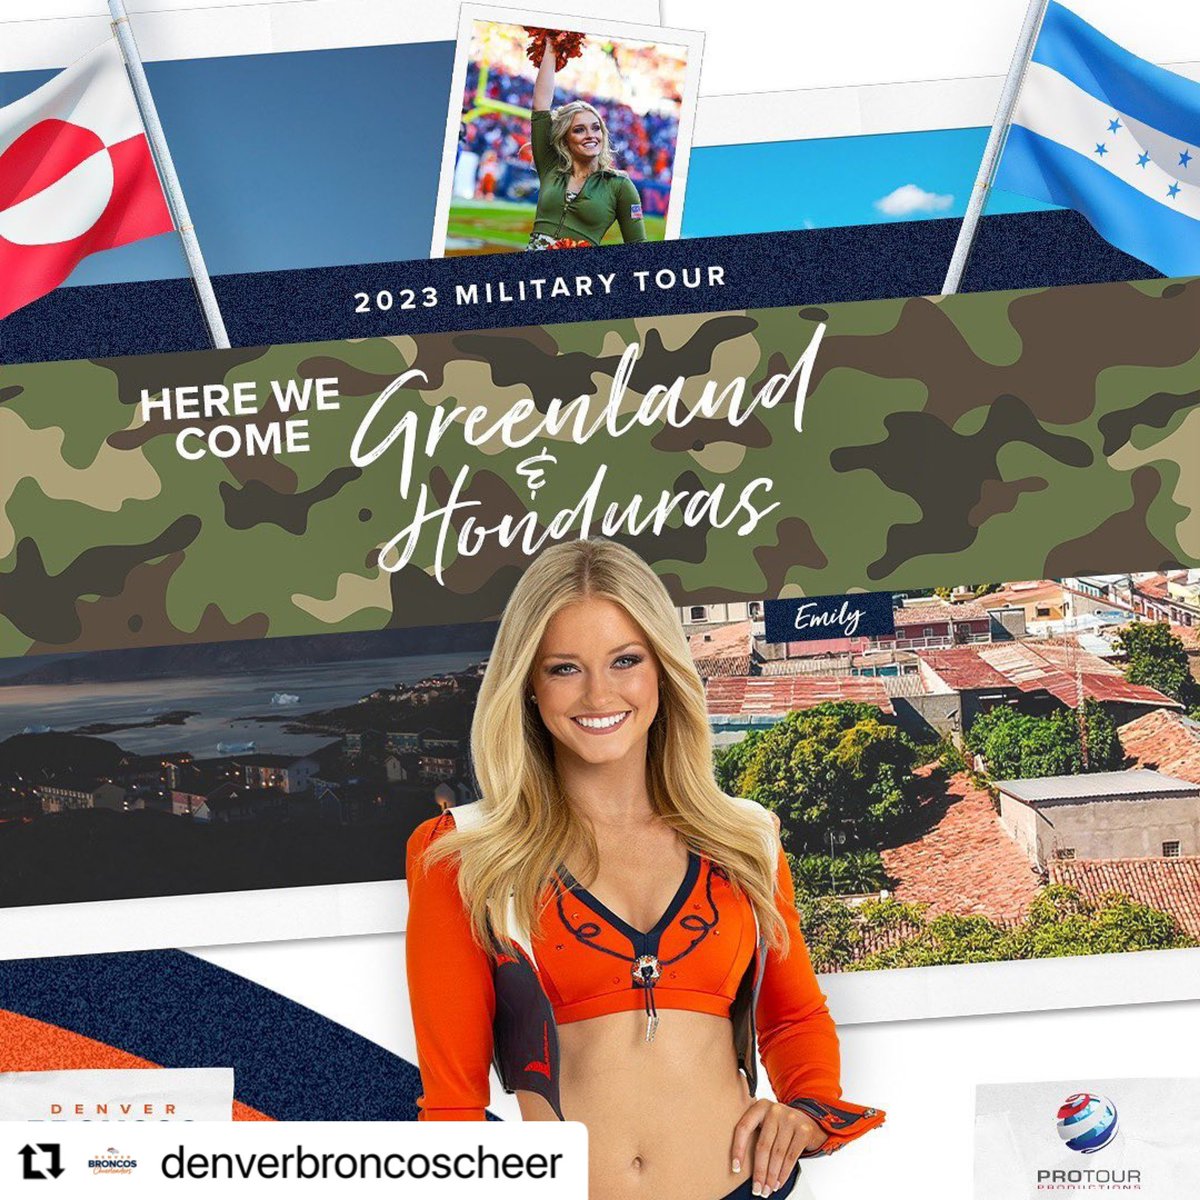 #Repost @denverbroncoscheer & @protourproductions ・・・ On my way! 🧳 ✈️✨ Greenland & Honduras are #BroncosCountry #DBCandAFE | #ArmedForcesEnt | #ProTourProductions | #ProTourGreenland | #ProTourHonduras